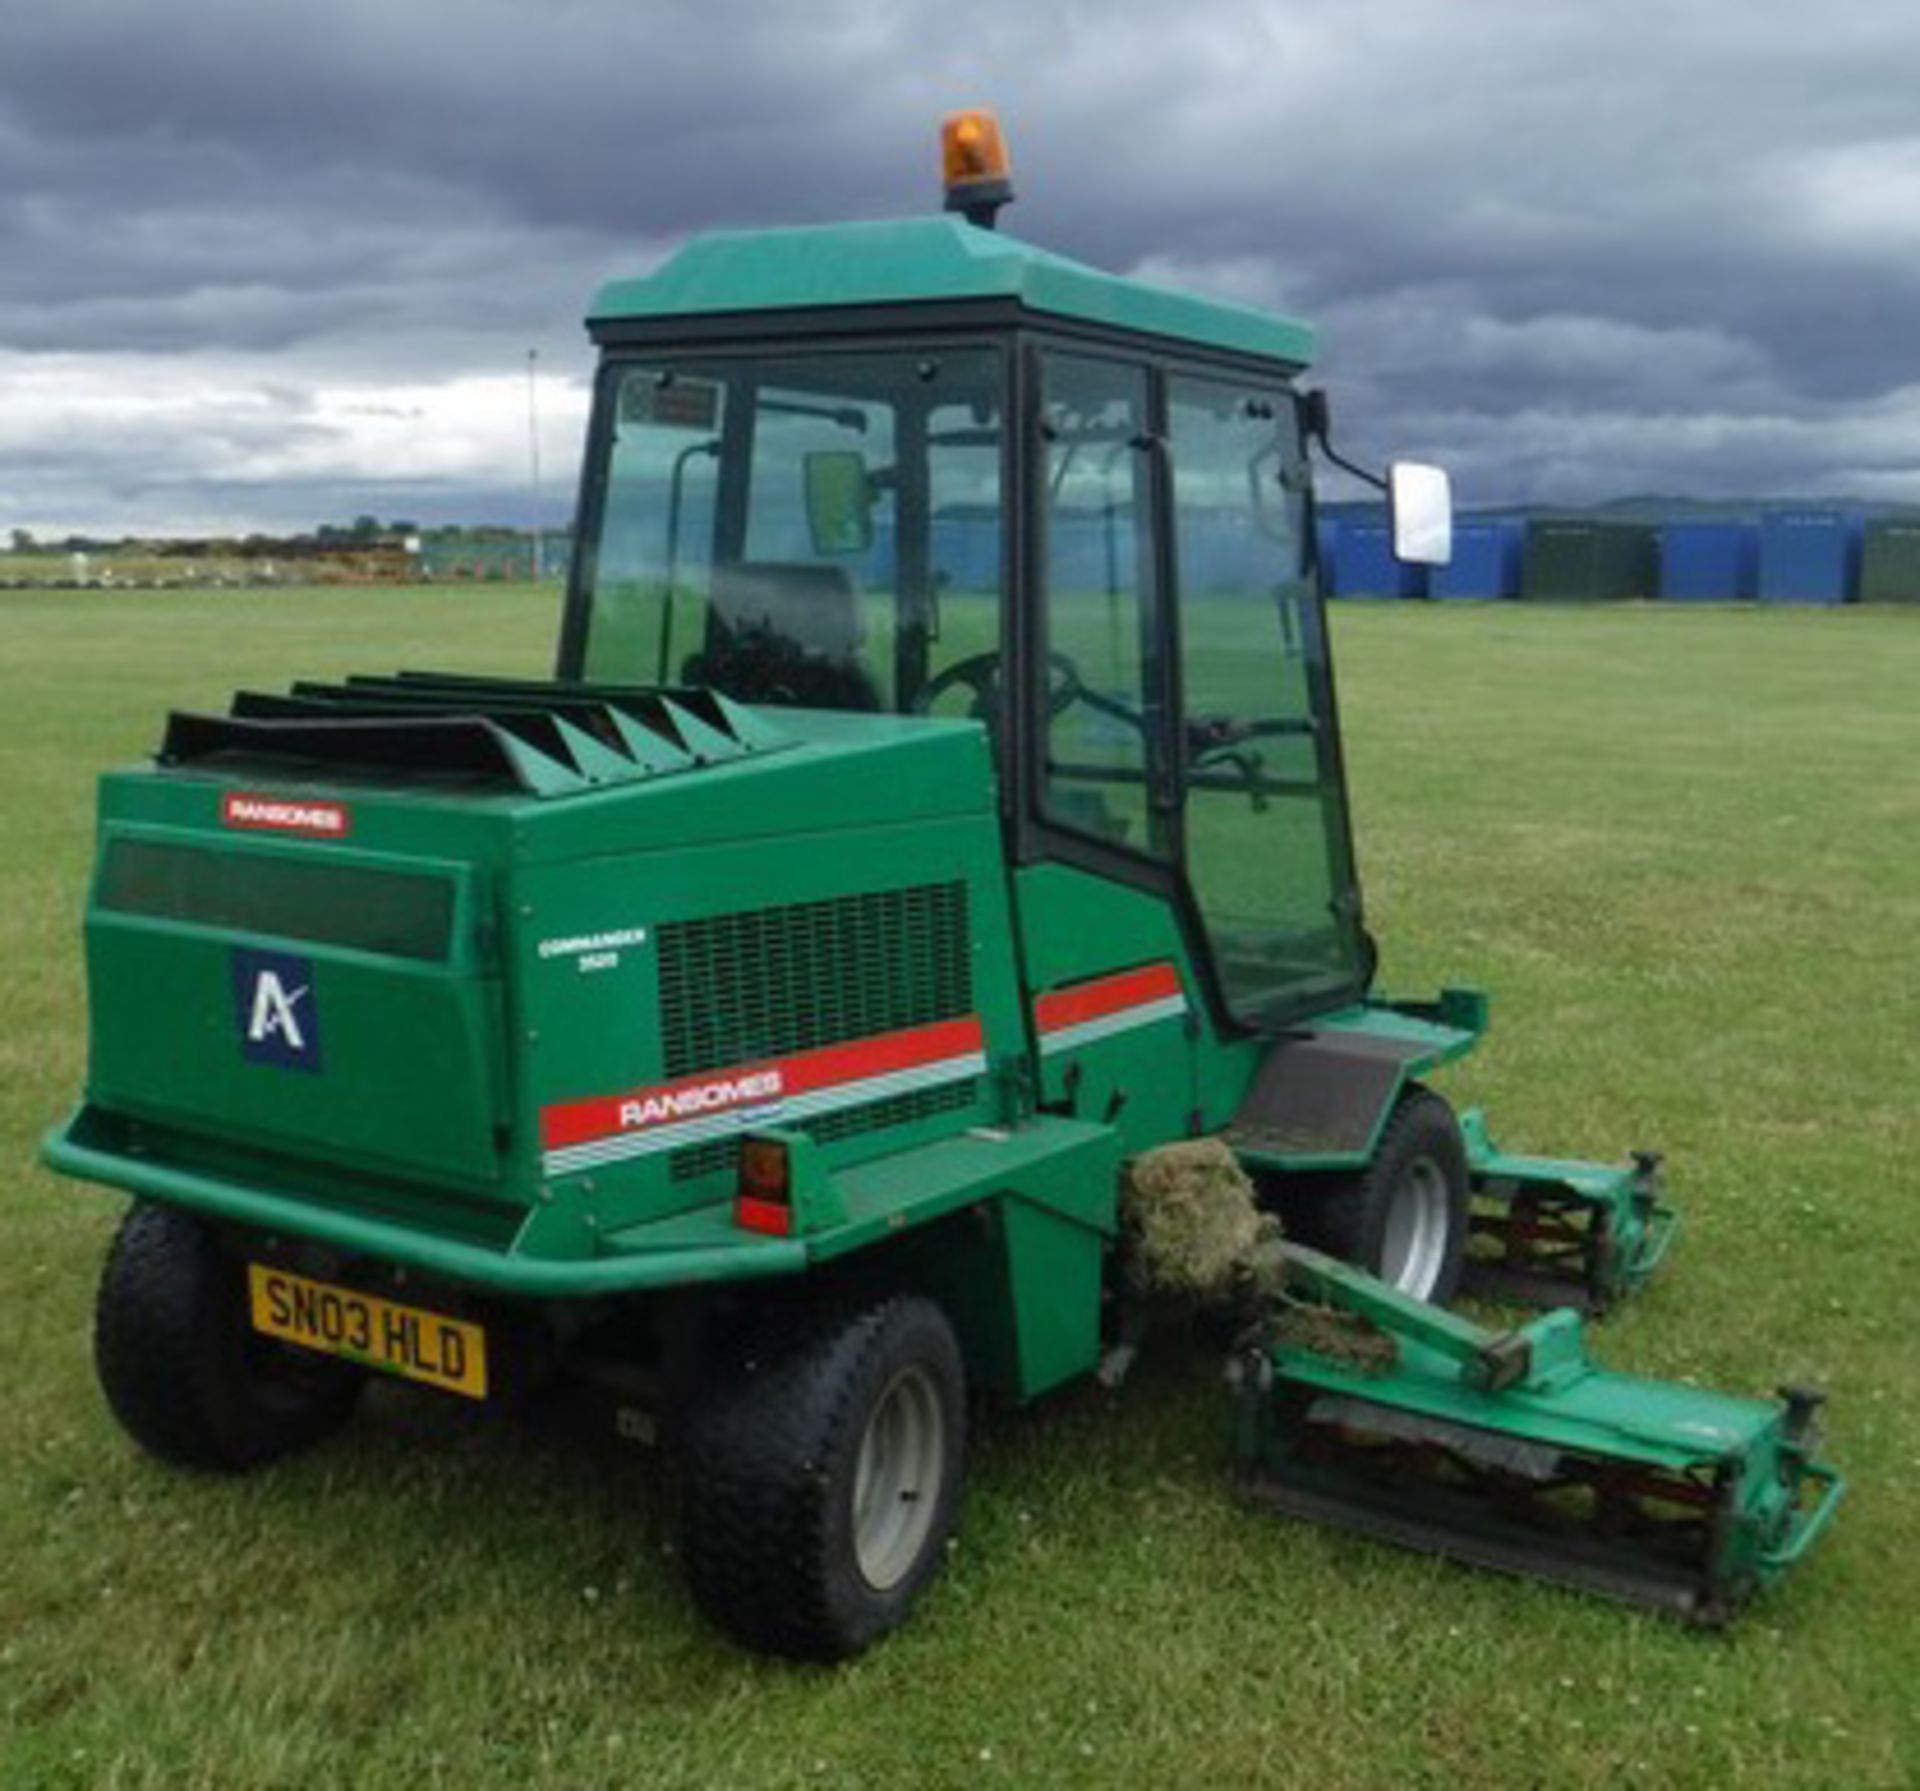 2003 RANSOMES 5 Gang ride on mower. Reg No SN03HLD. 4407hrs (correct) c/w Ransomes safety cab - Image 26 of 34